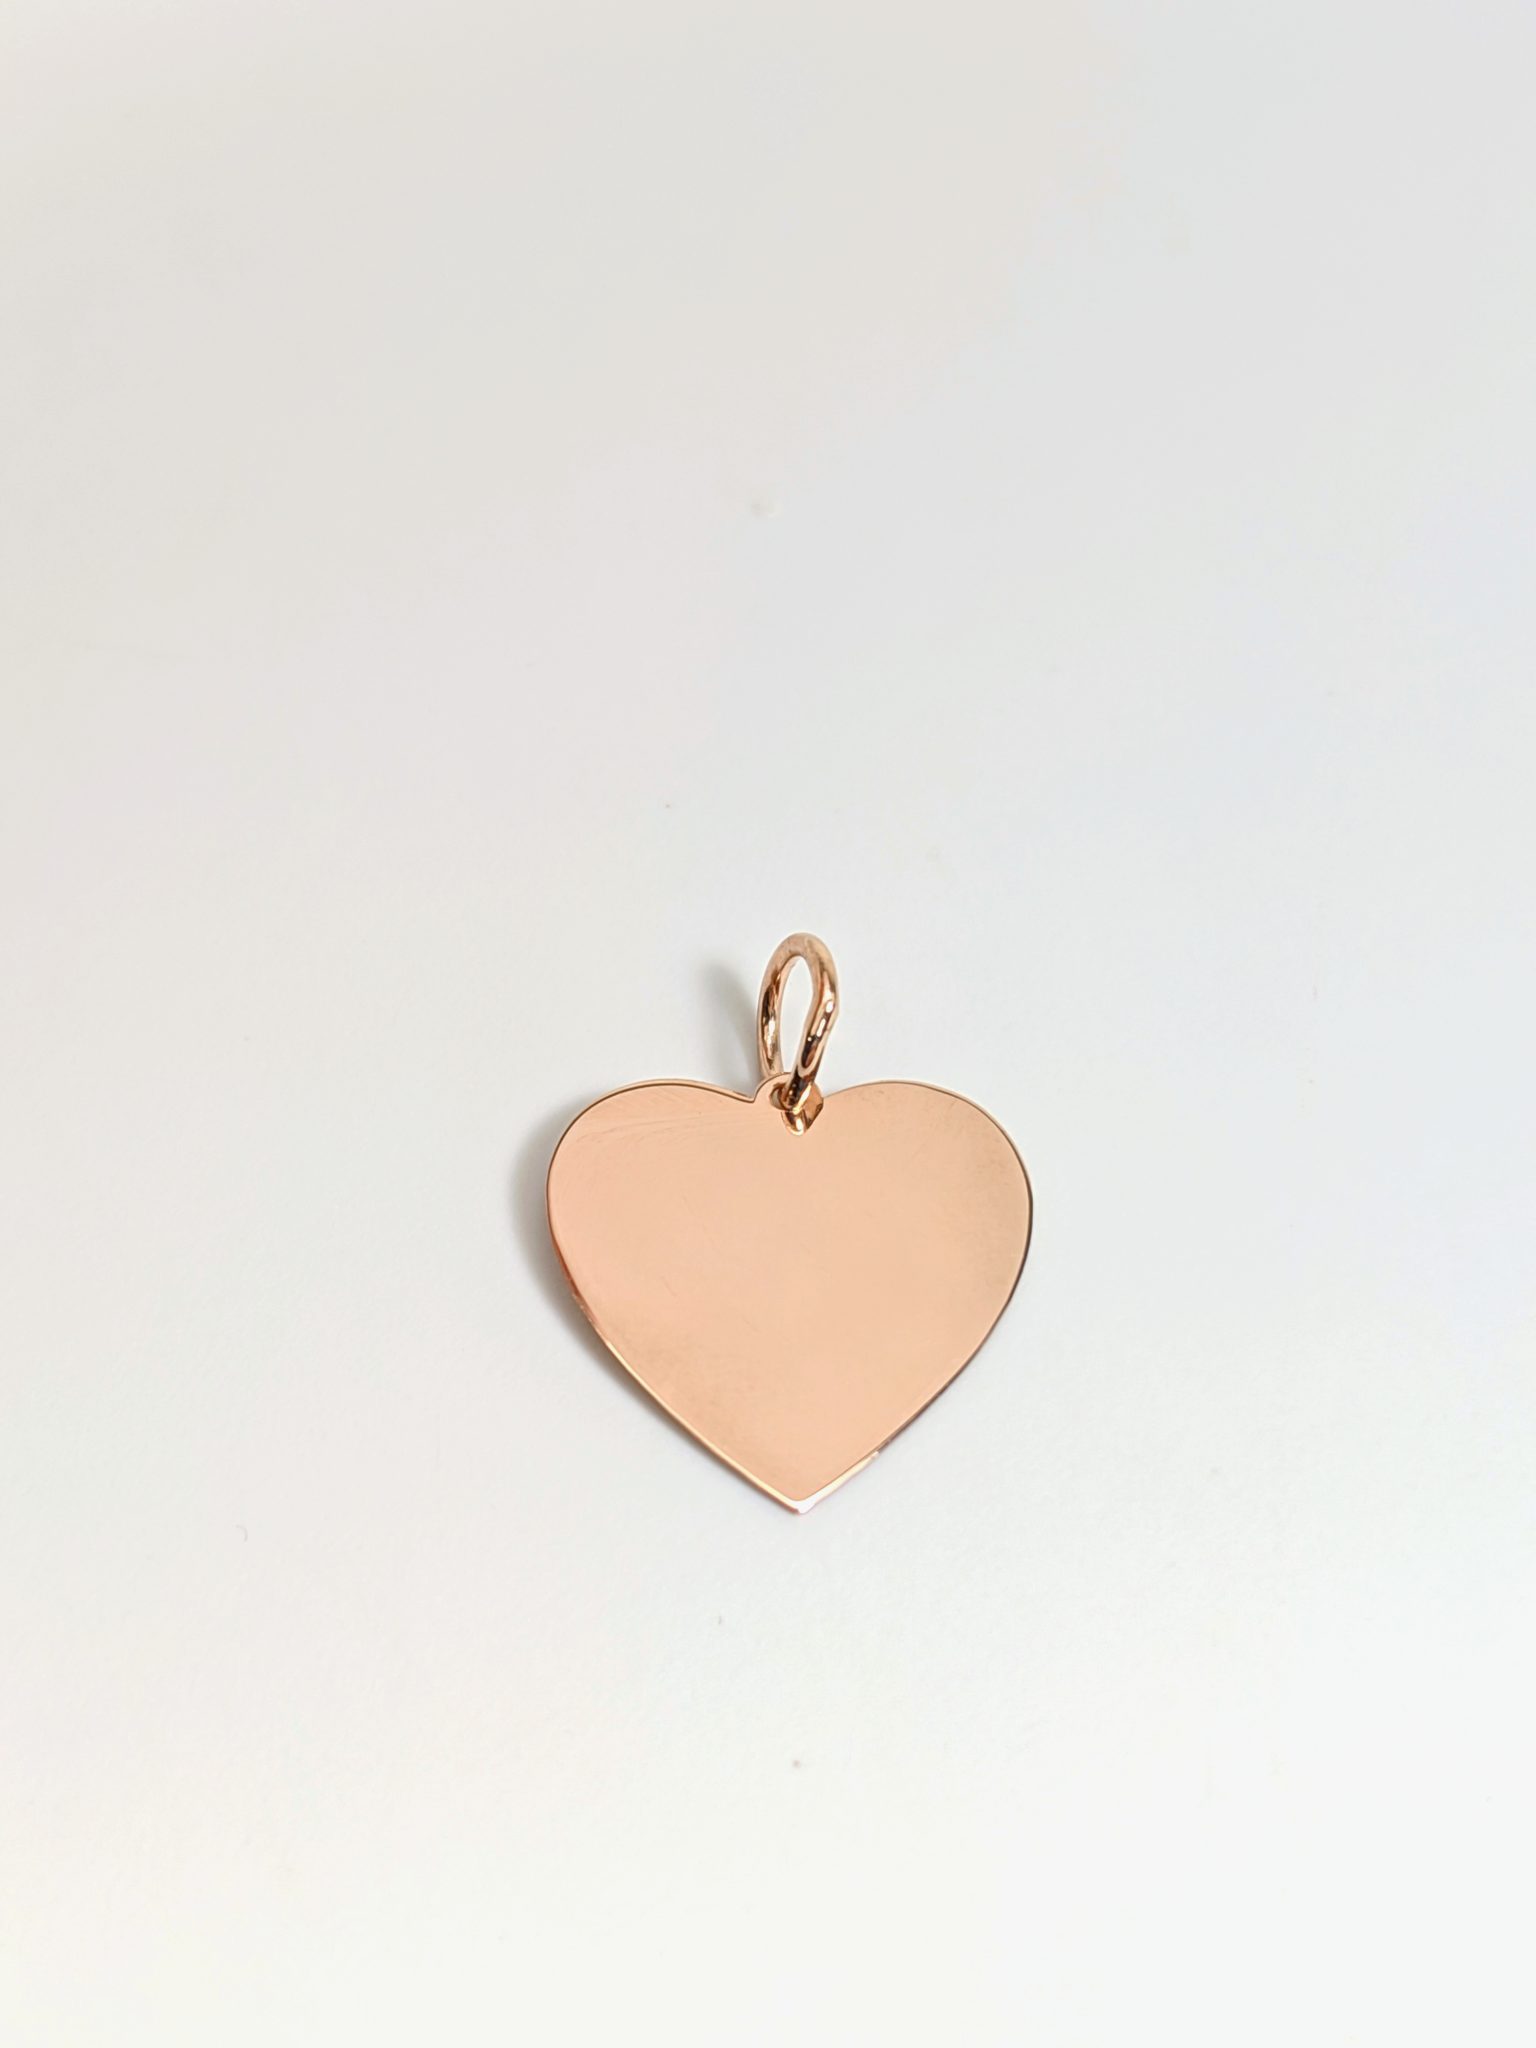 14k Heart Disc Charm in Rose Gold White Gold Yellow Gold and Variety of Options 